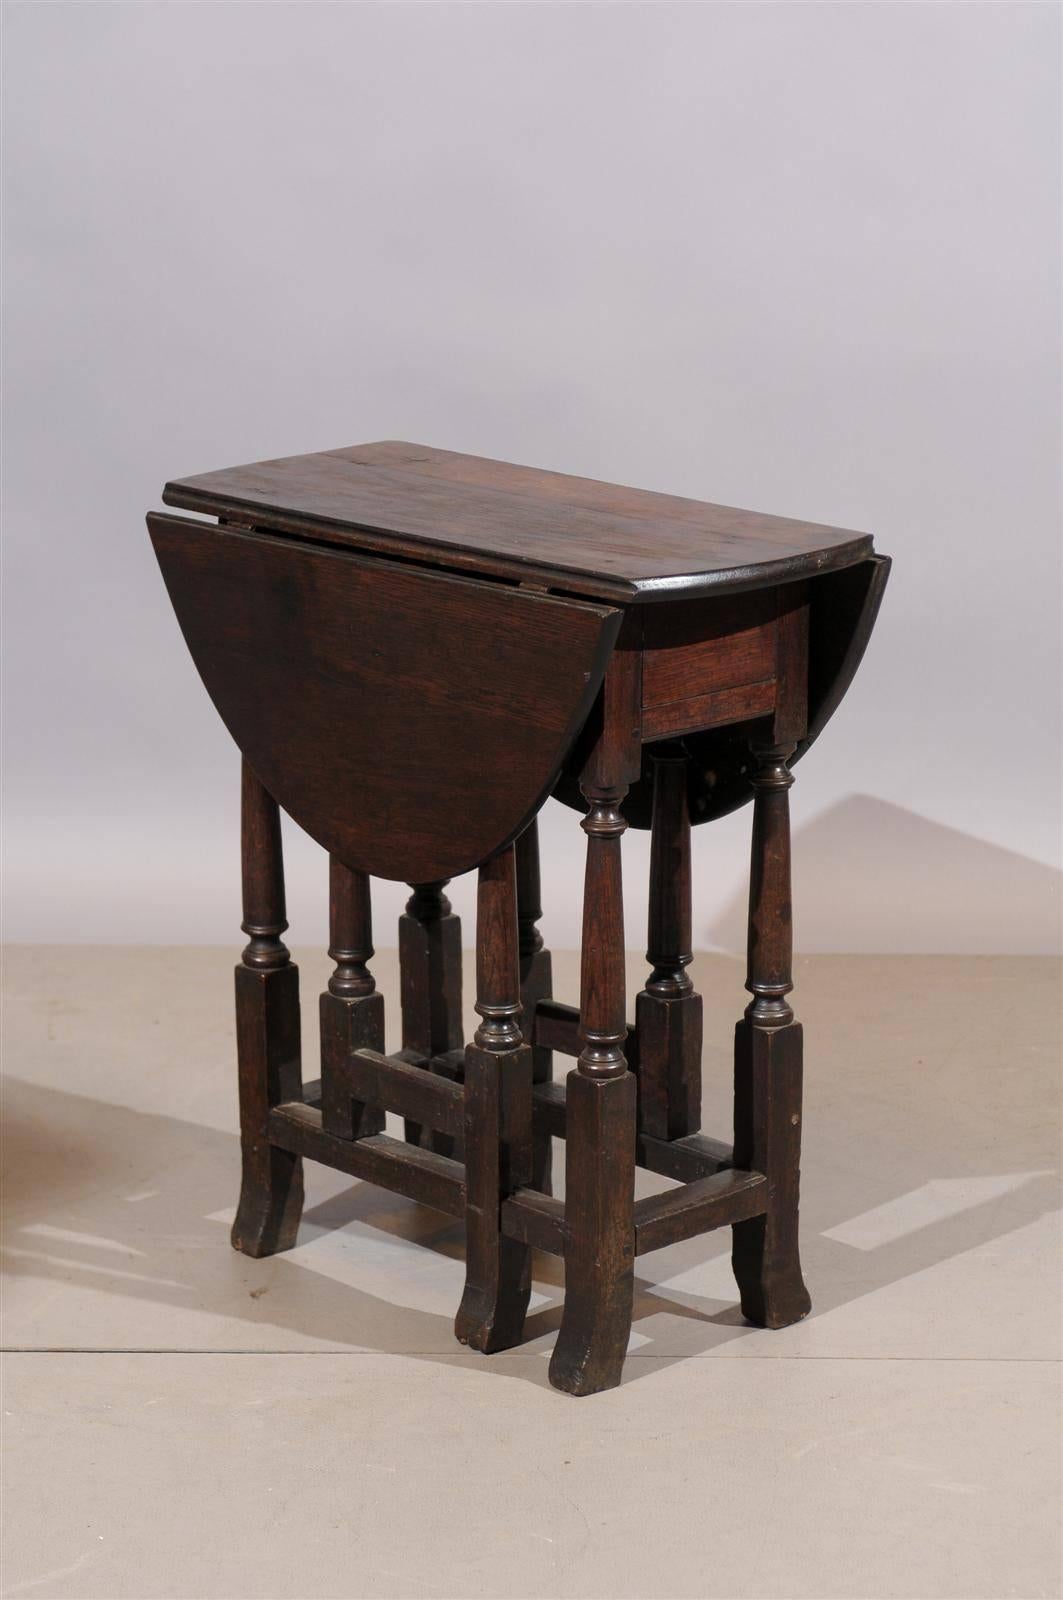 A 18th century English oak gate leg table with drop leaves, drawer, and stretcher.